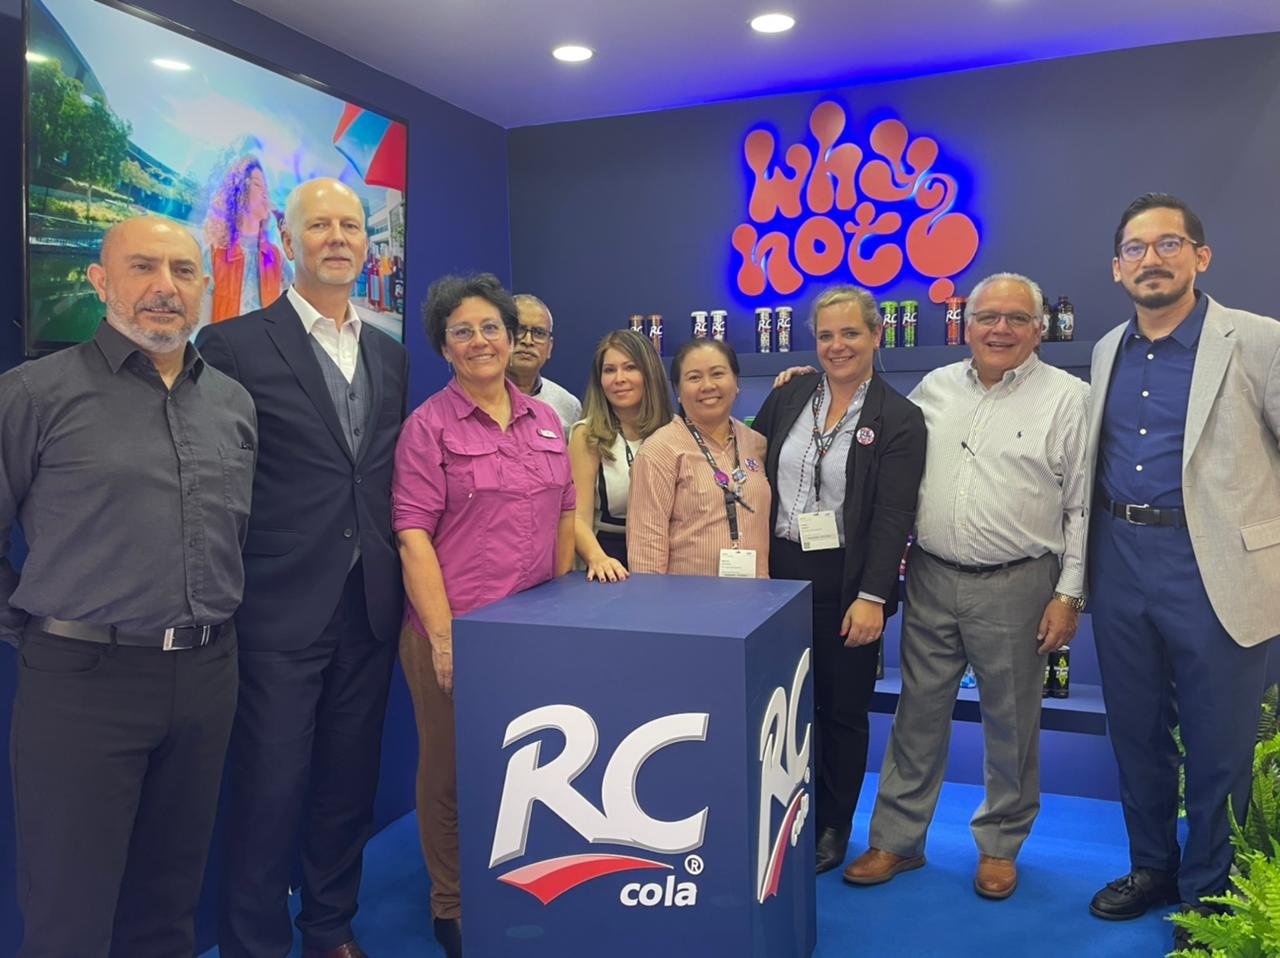 Why Not Branding at the RC Cola booth